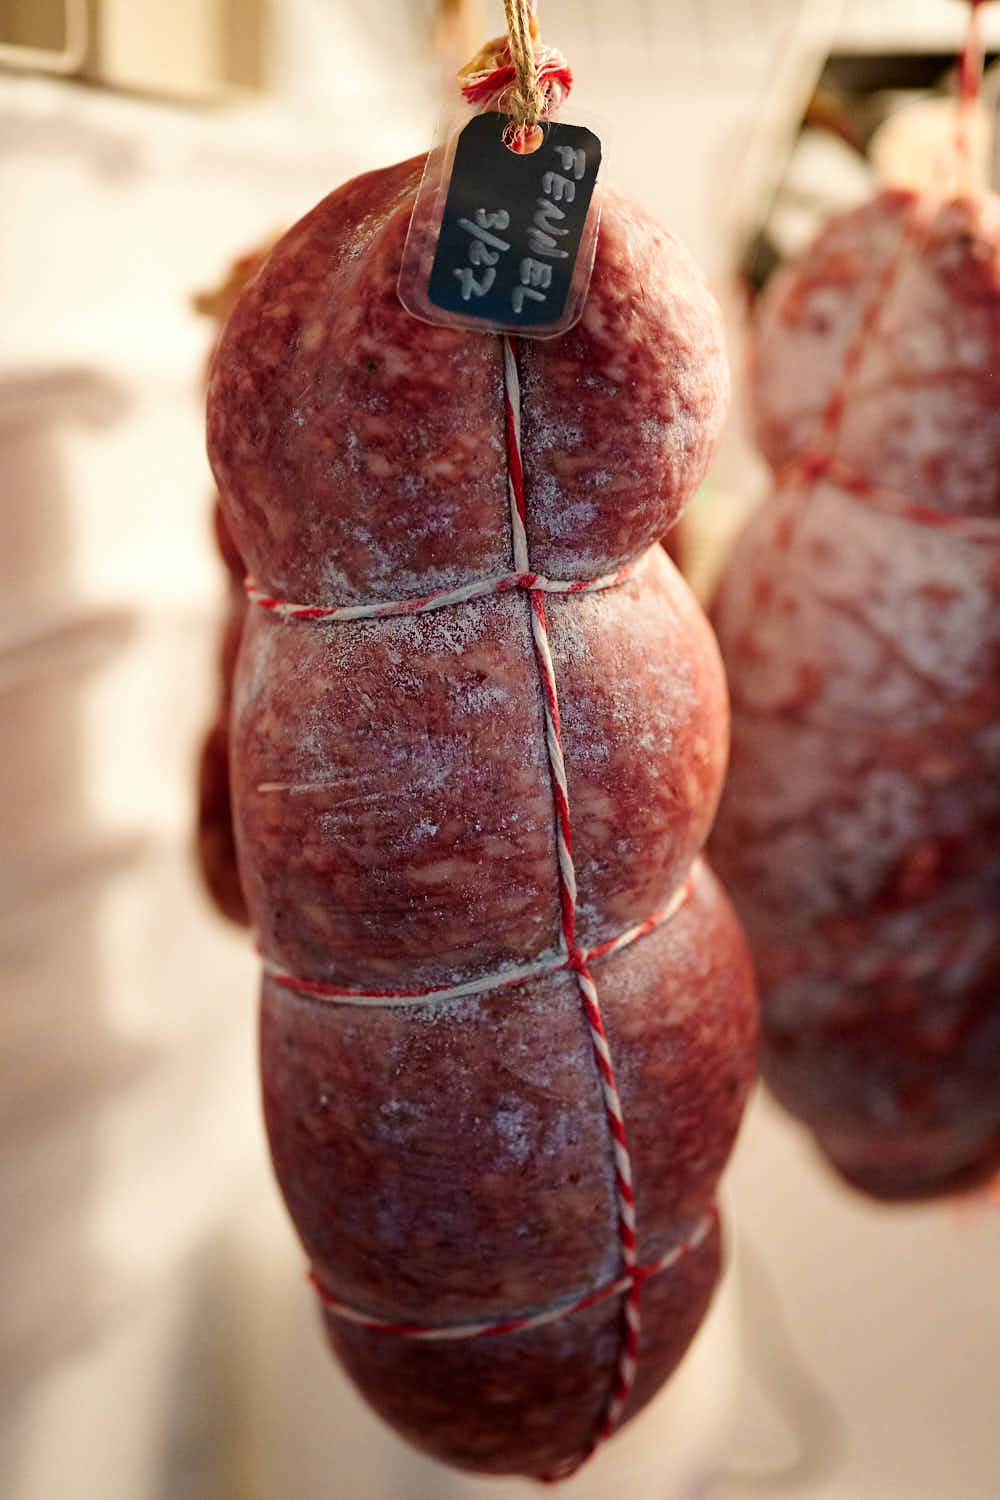 Fennel salami curing in a meat curing chamber